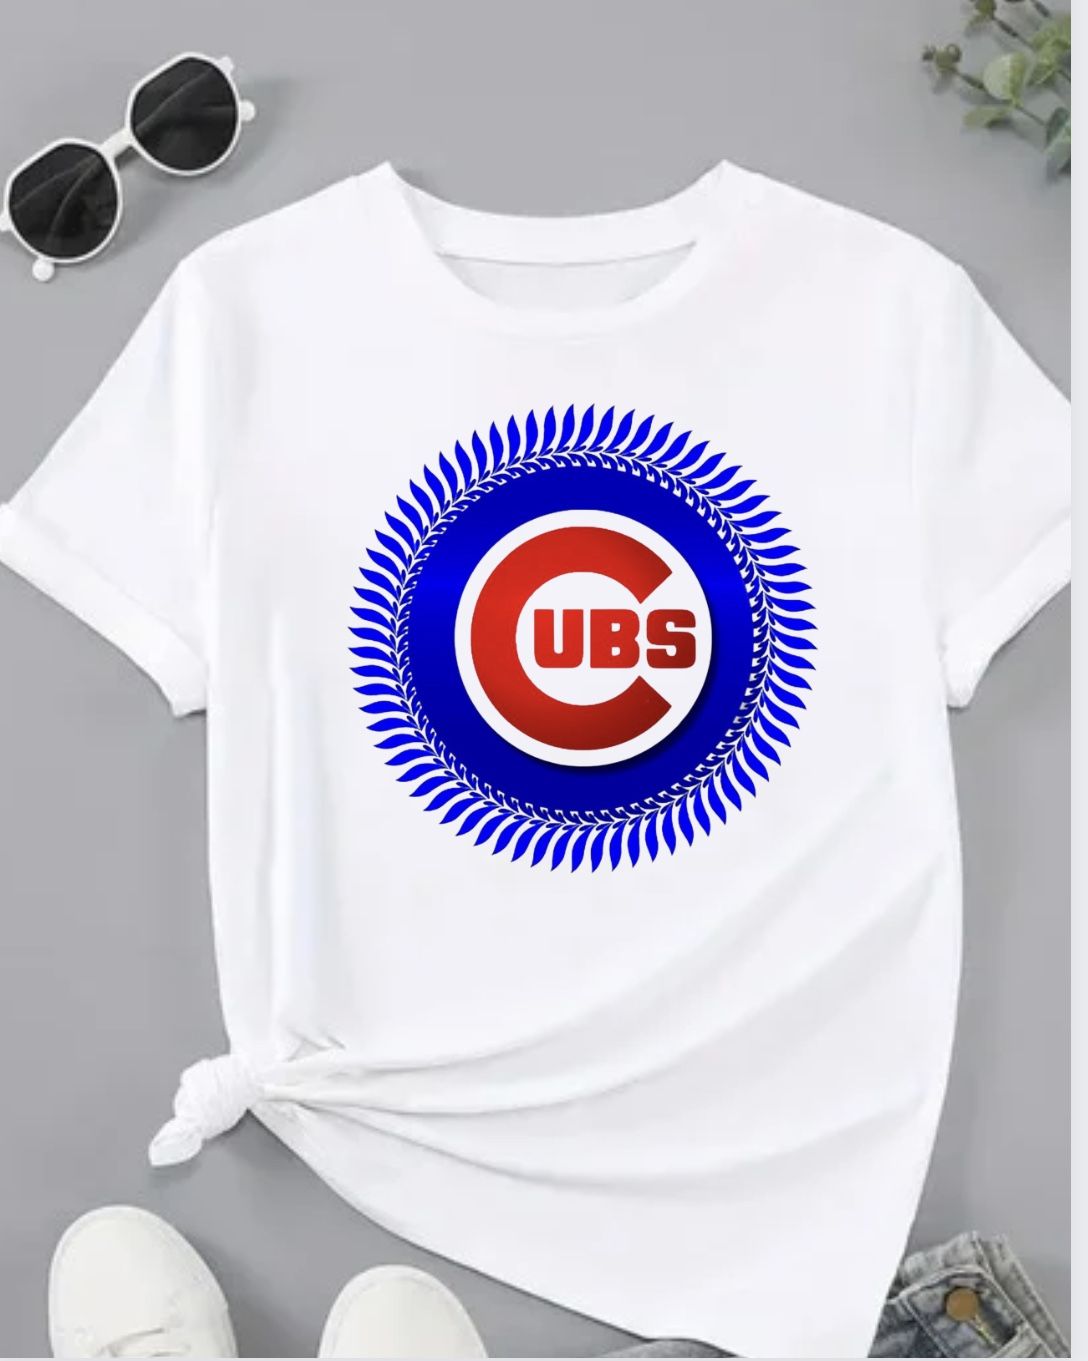 New Windy City Chicago Cubs Baseball Tee.   Size Large. 